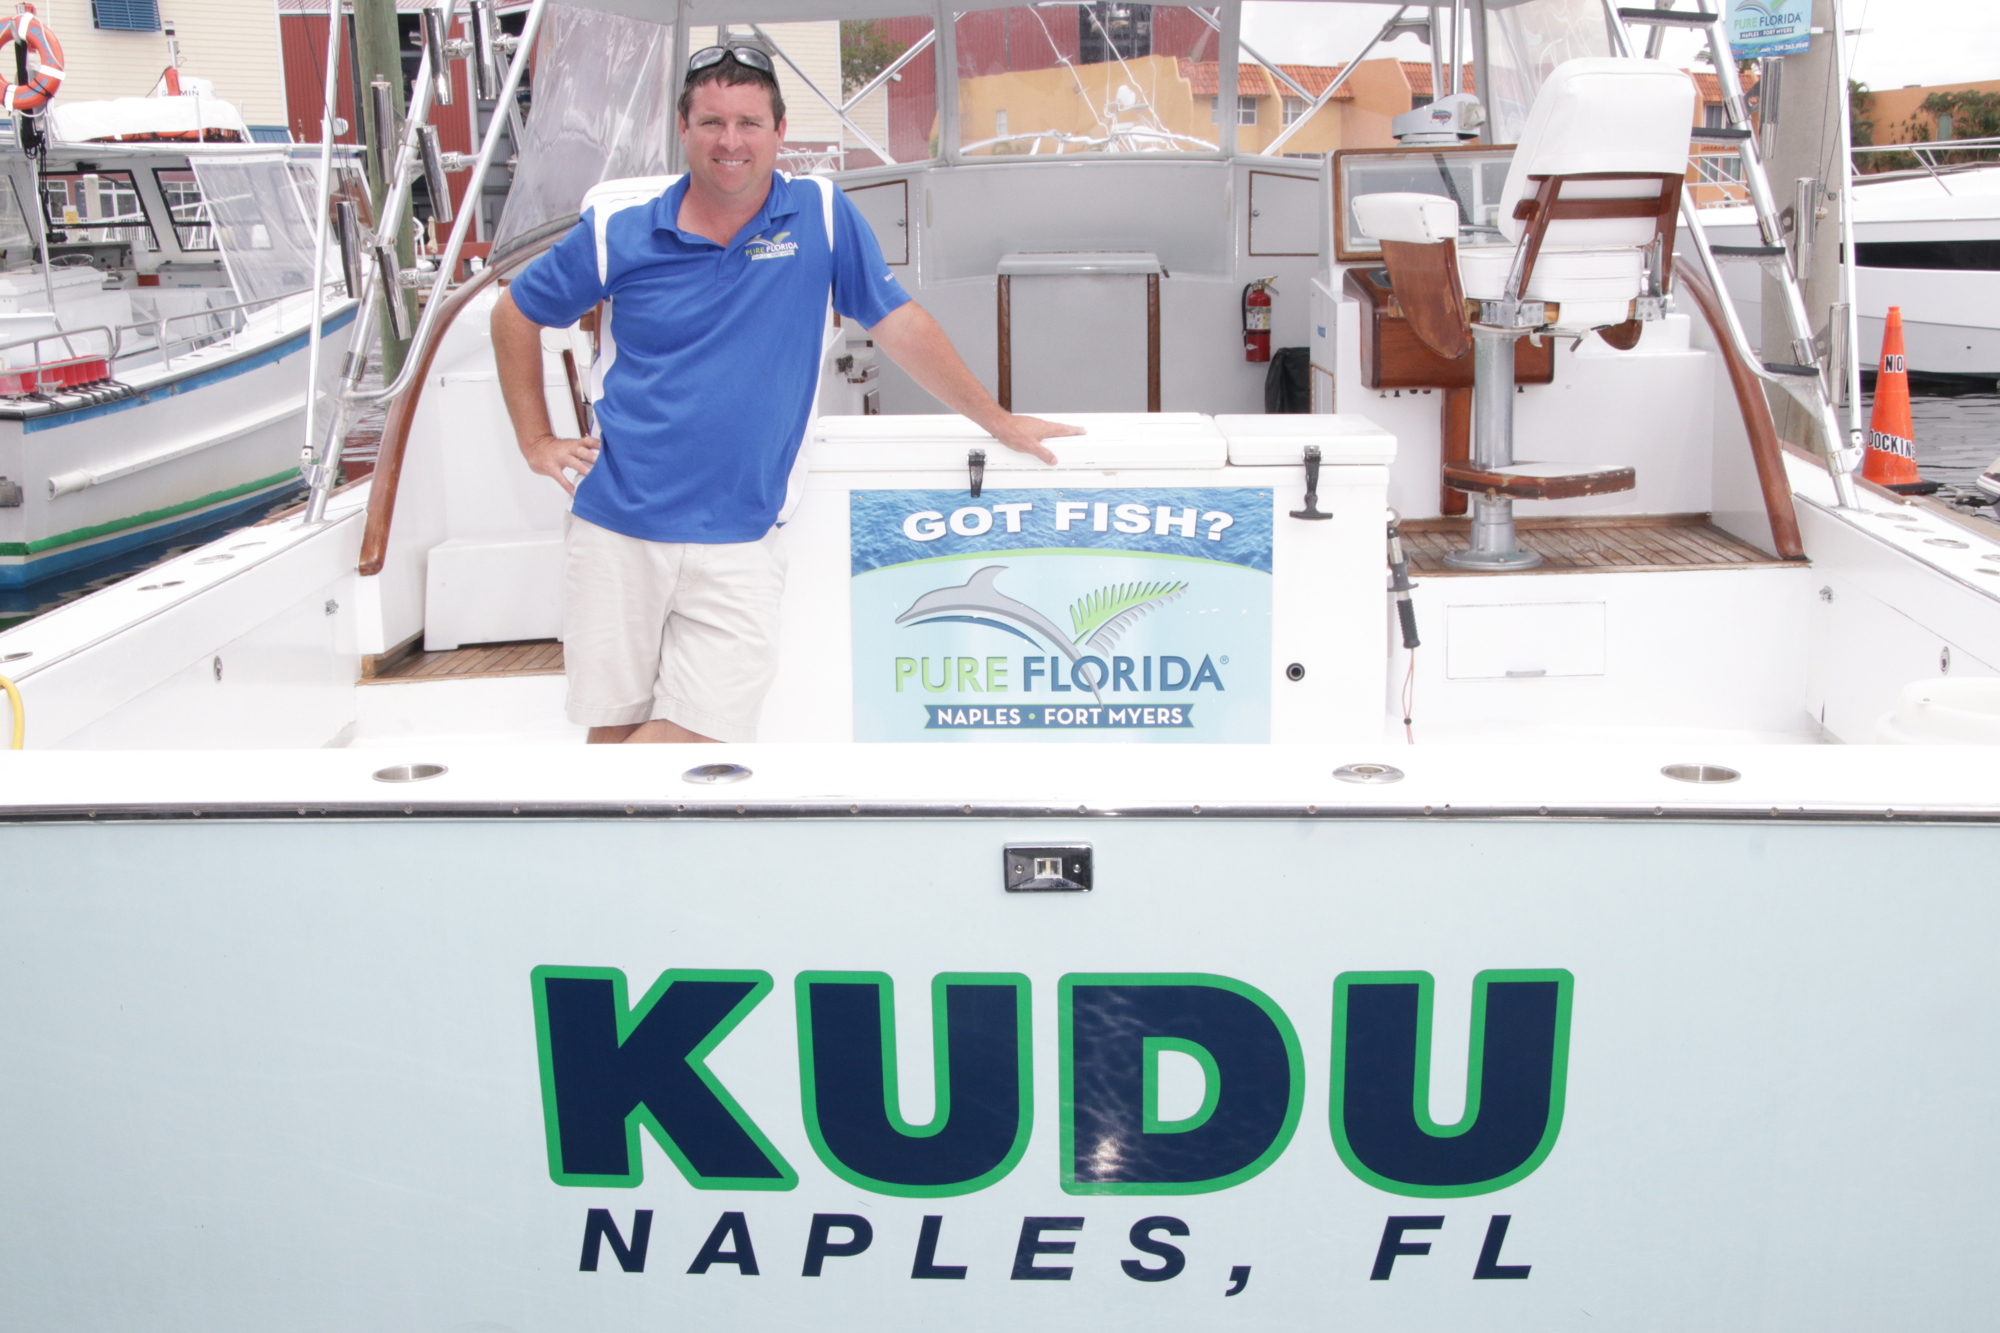 Pure Florida operates fishing boats, such as Kudu, and sight-seeing tour boats. It also offers boat and personal watercraft rentals.